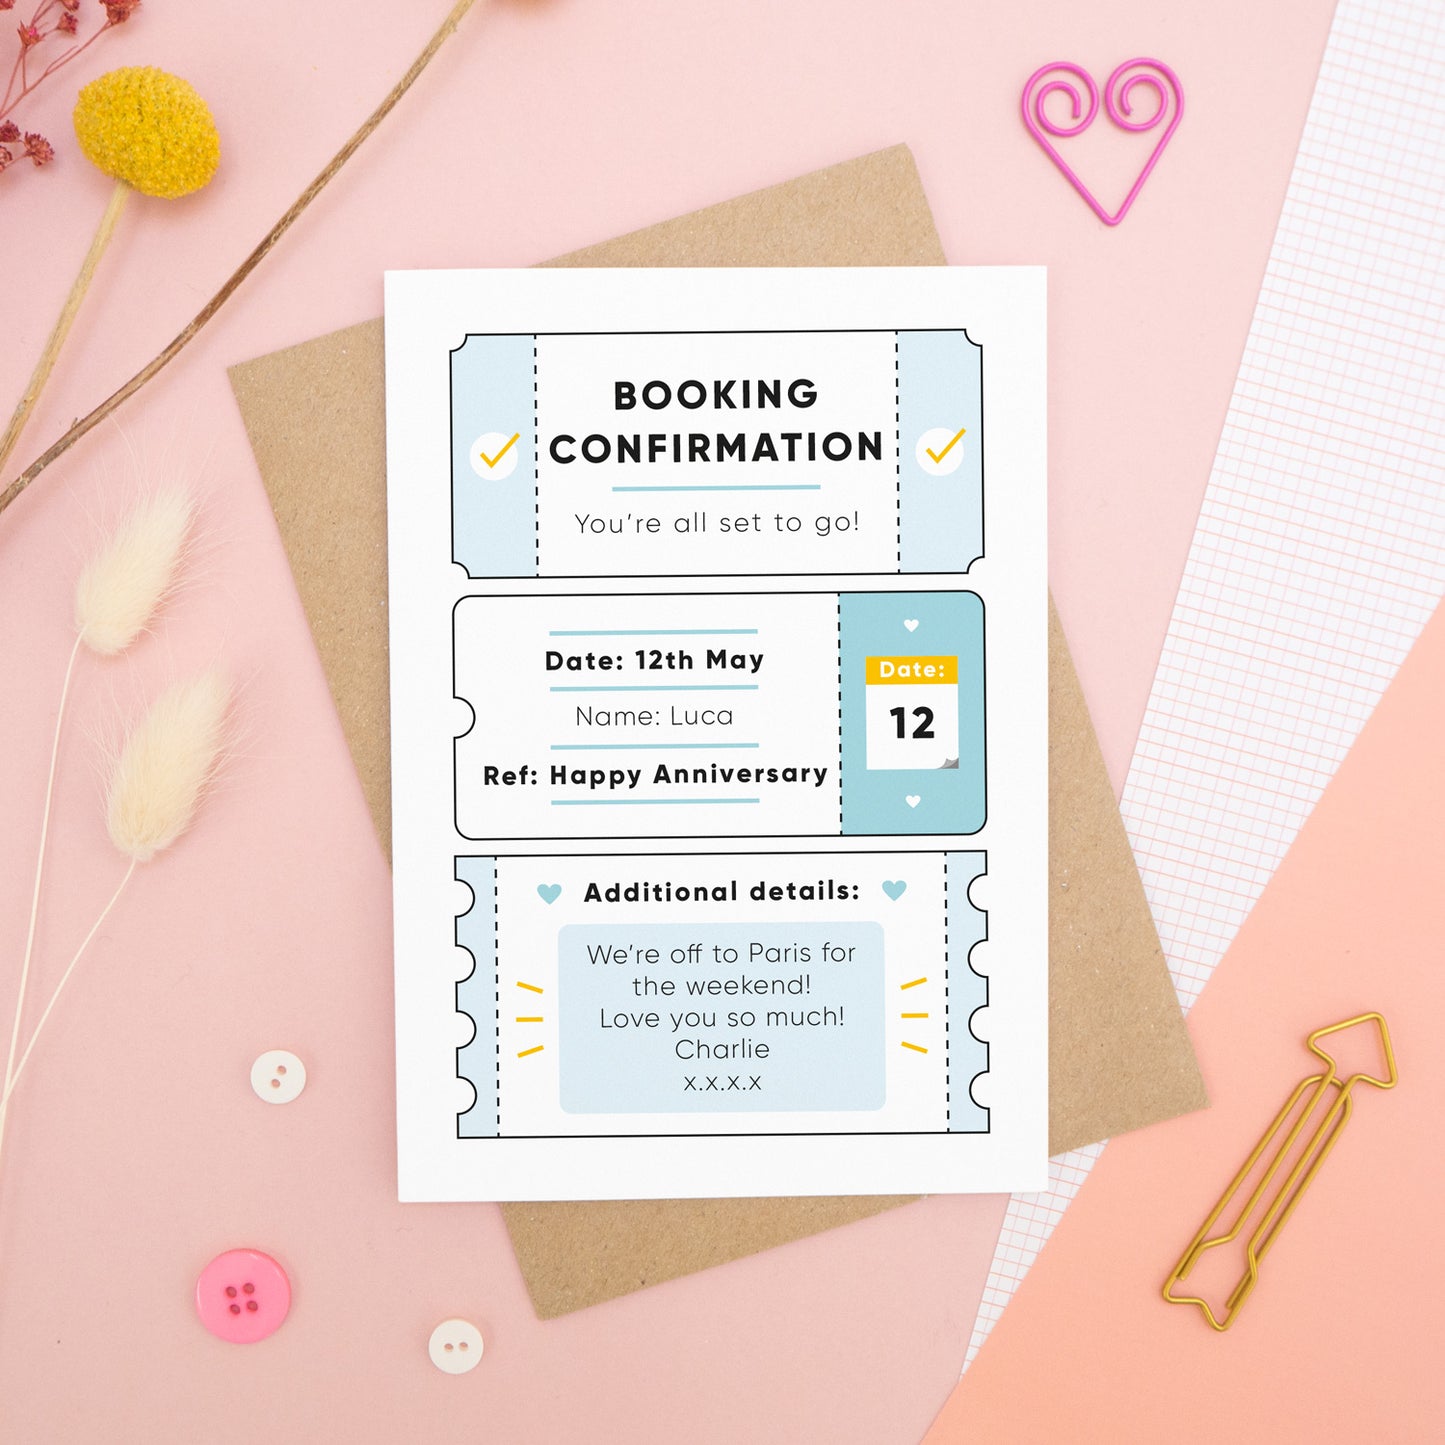 A personalised anniversary booking confirmation gift card lying flat lay on a pink and peach background scattered with dry flowers, grid paper, buttons and a heart. The card is lying on it’s kraft brown envelope and pictured is the blue version of the gift card.